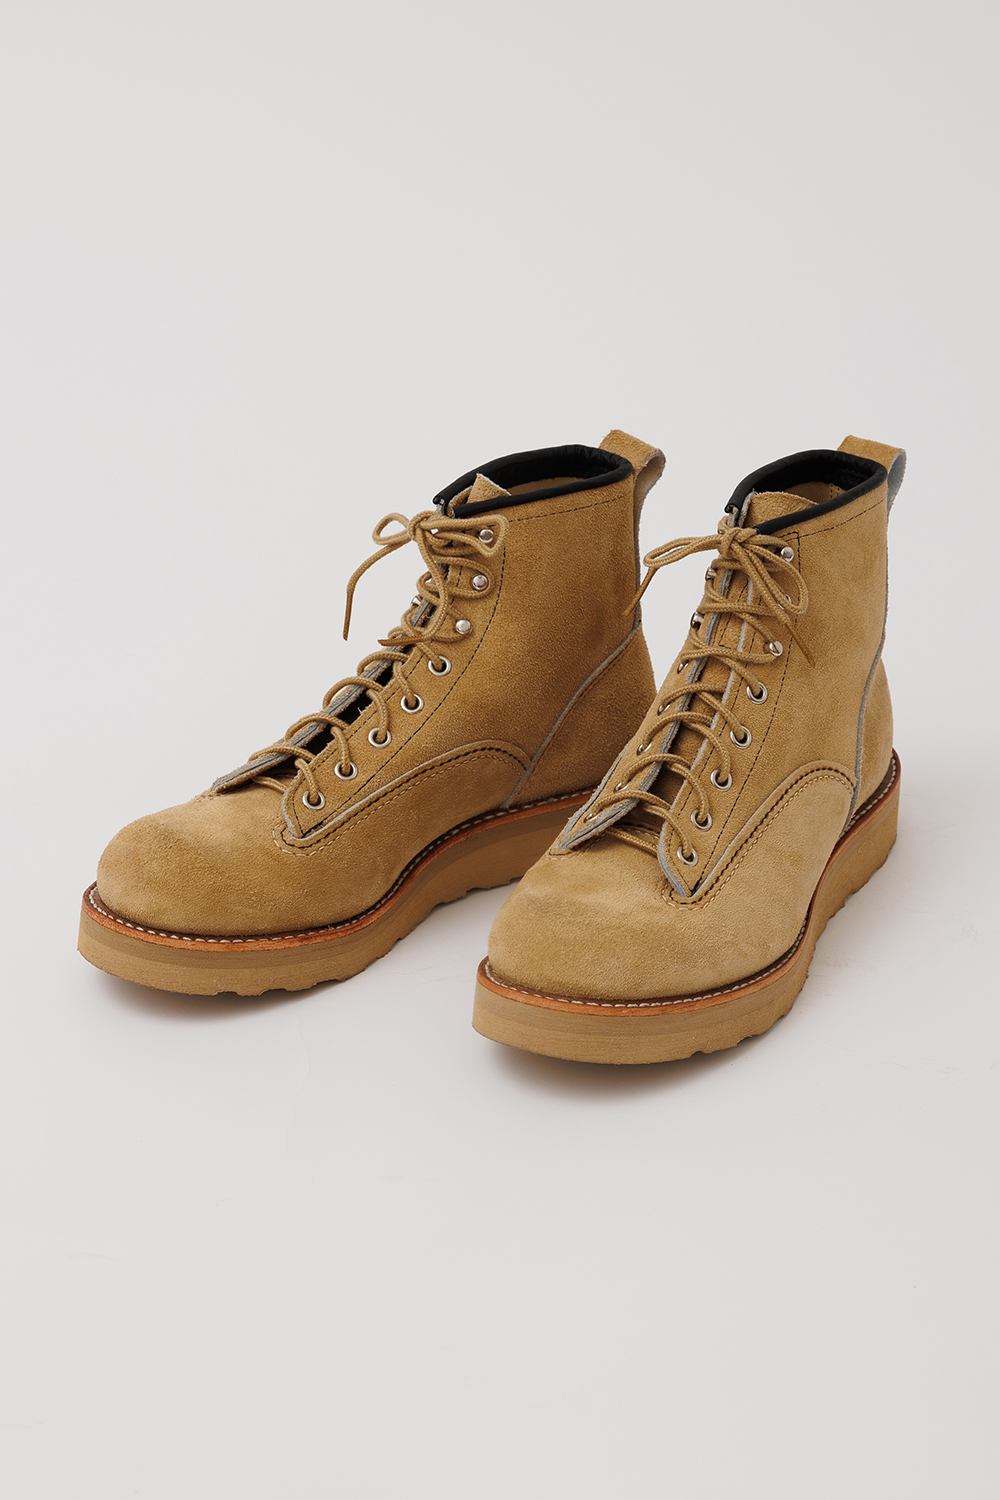 ParabootsRED WING 8167 nonnative ノンネイティブ BIOTOP